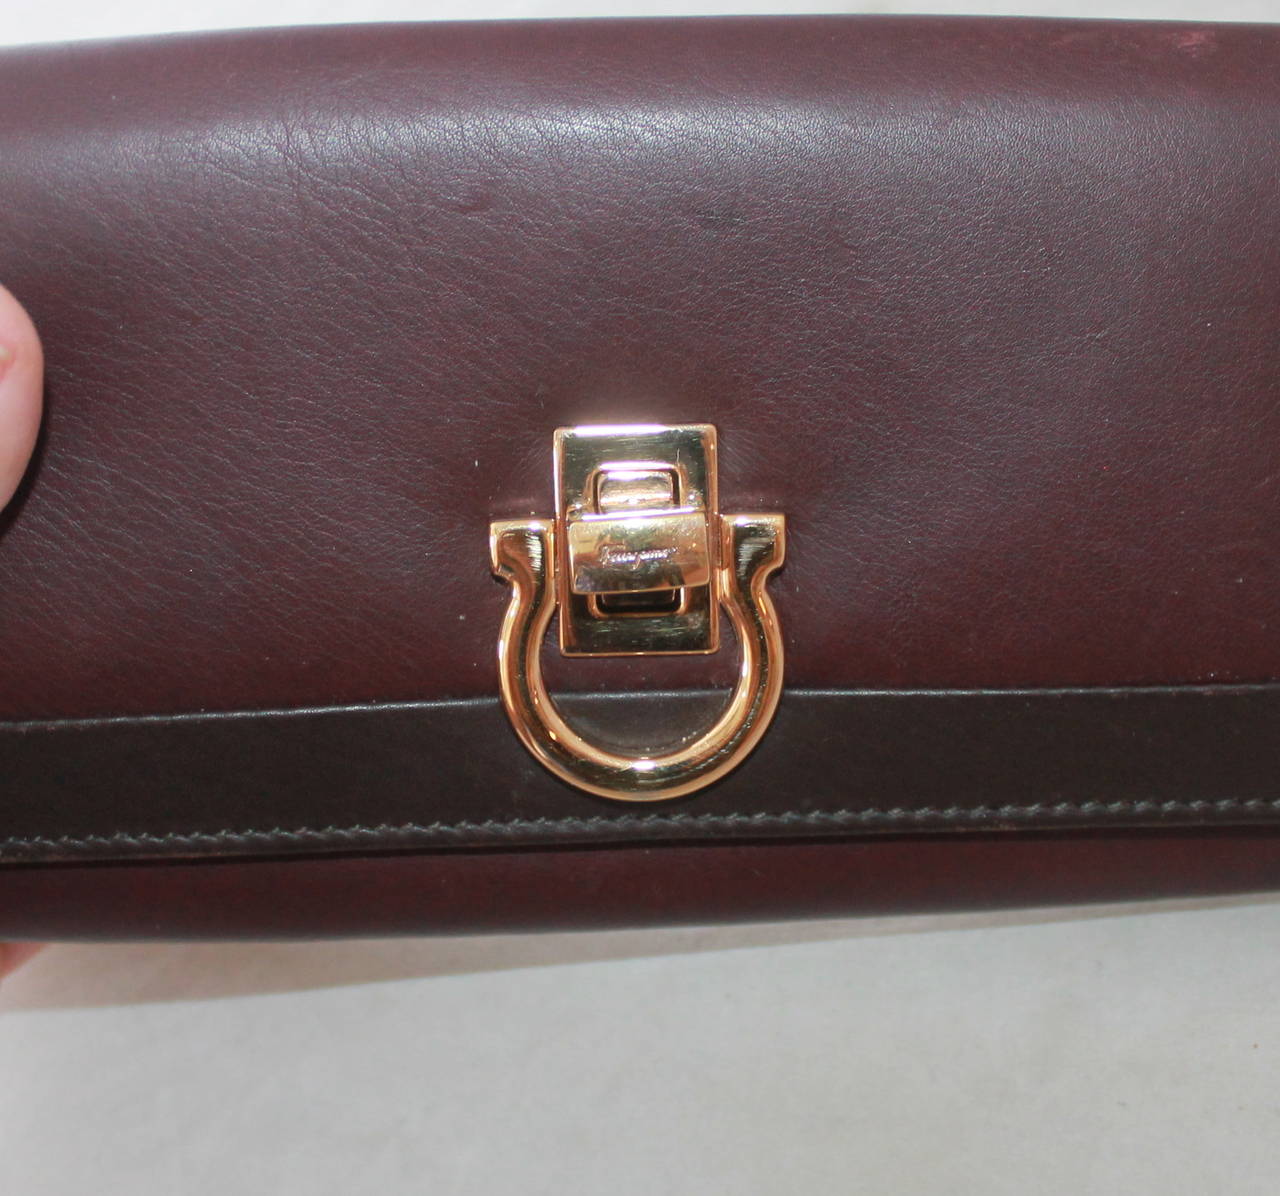 Salvatore Ferragamo Eggplant Leather Wallet with Box GHW. This wallet is in fair condition due to visible wear on the back (some scuffing on bottom, image 3) and minor wear on the front. There is some scuffing inside from use. This wallet is an